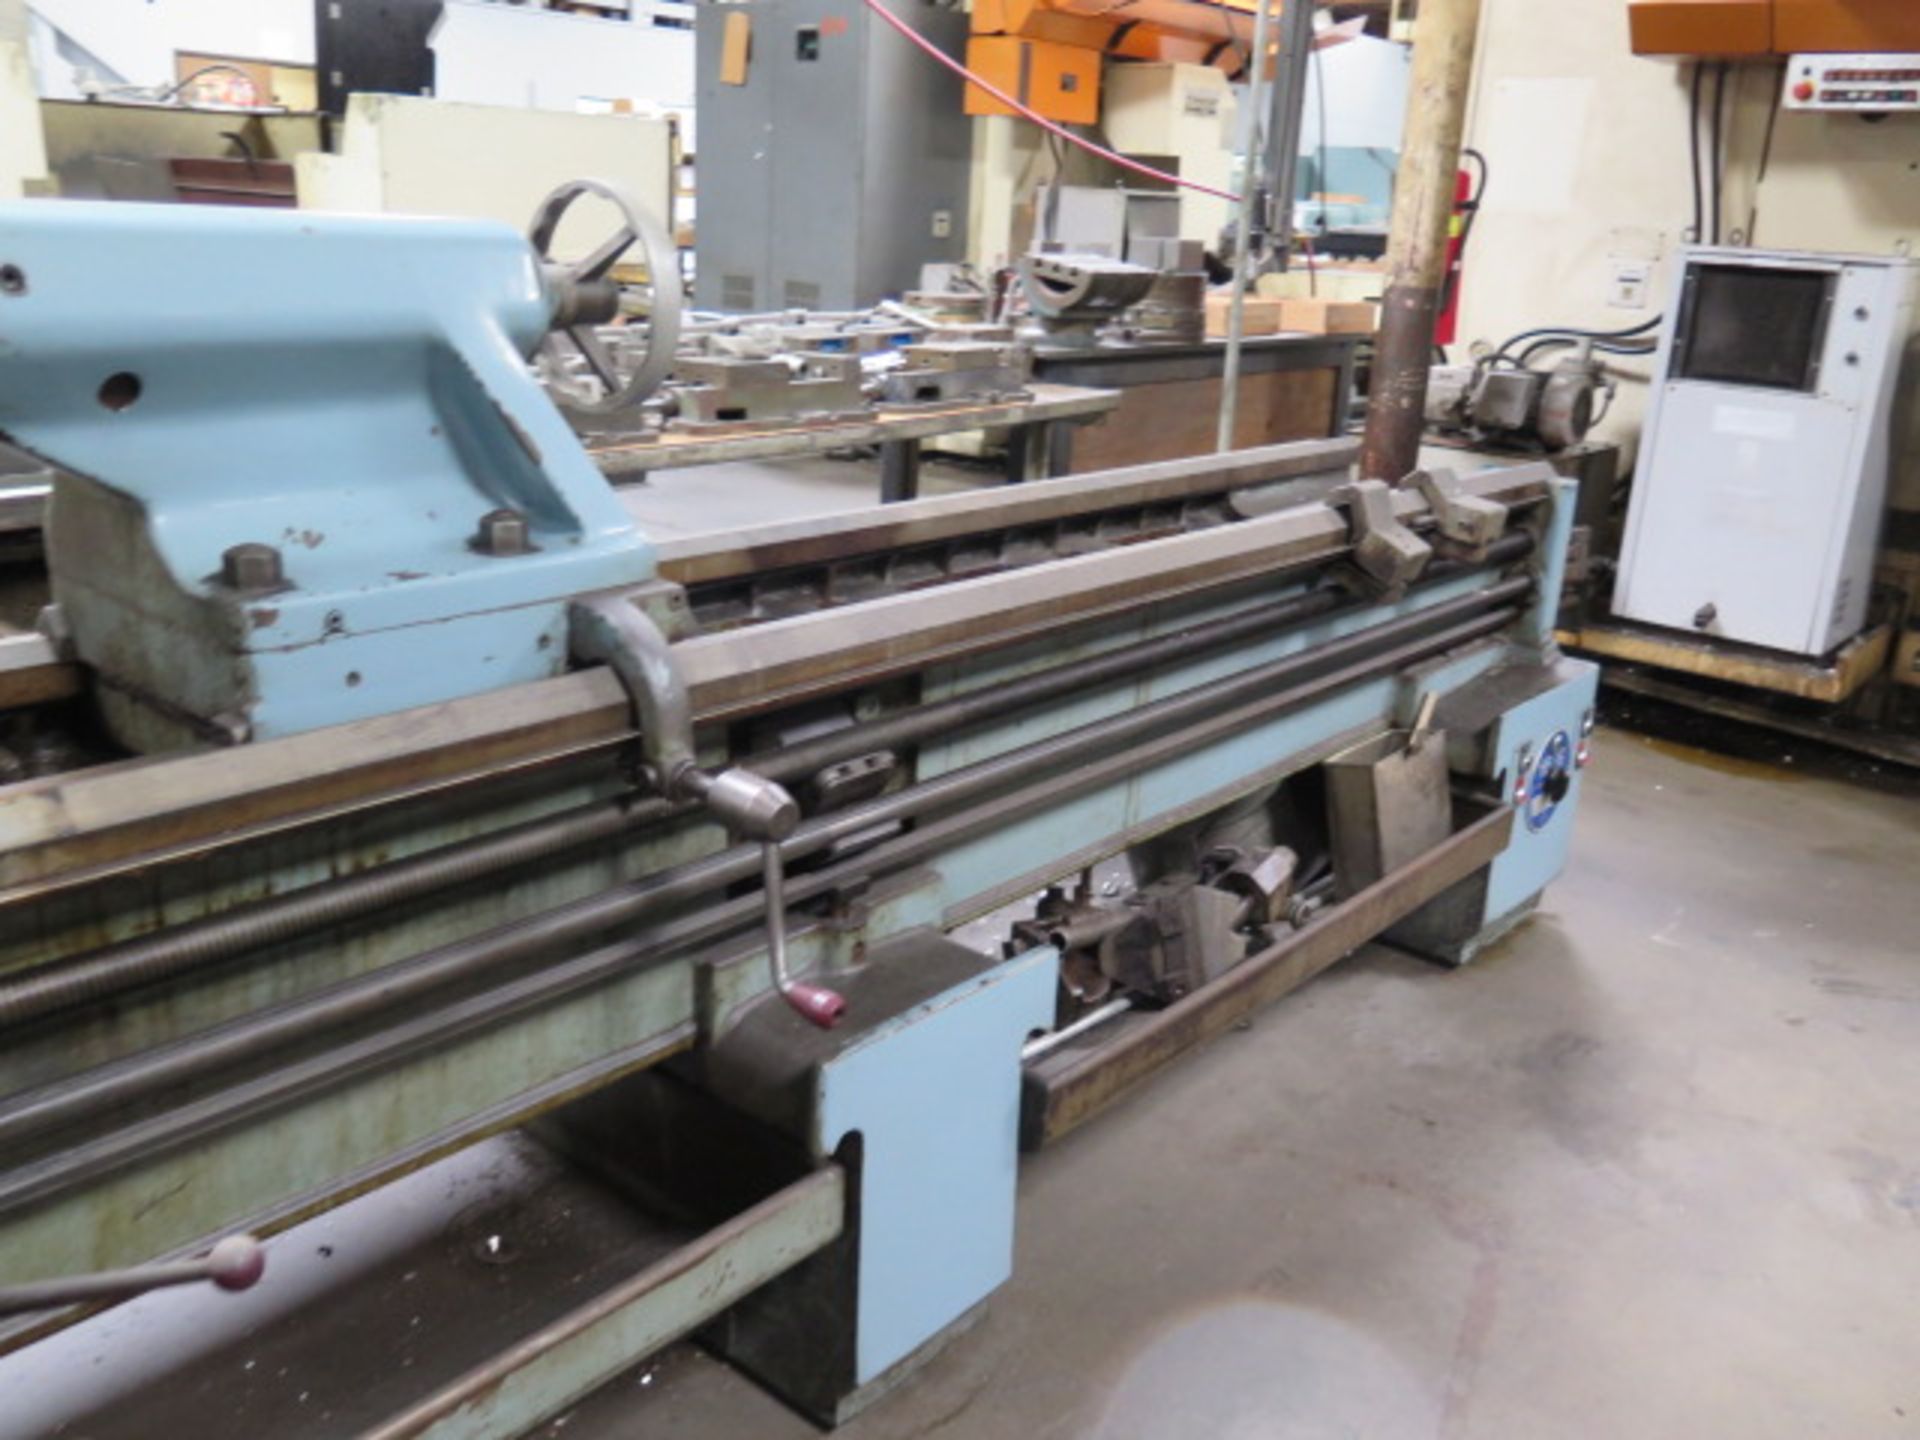 Cazeneuve HB725 26 ½” x 122” Geared Head Gap Bed Lathe w/ 14-1600 RPM, Inch/mm Threading, SOLD AS IS - Image 9 of 11